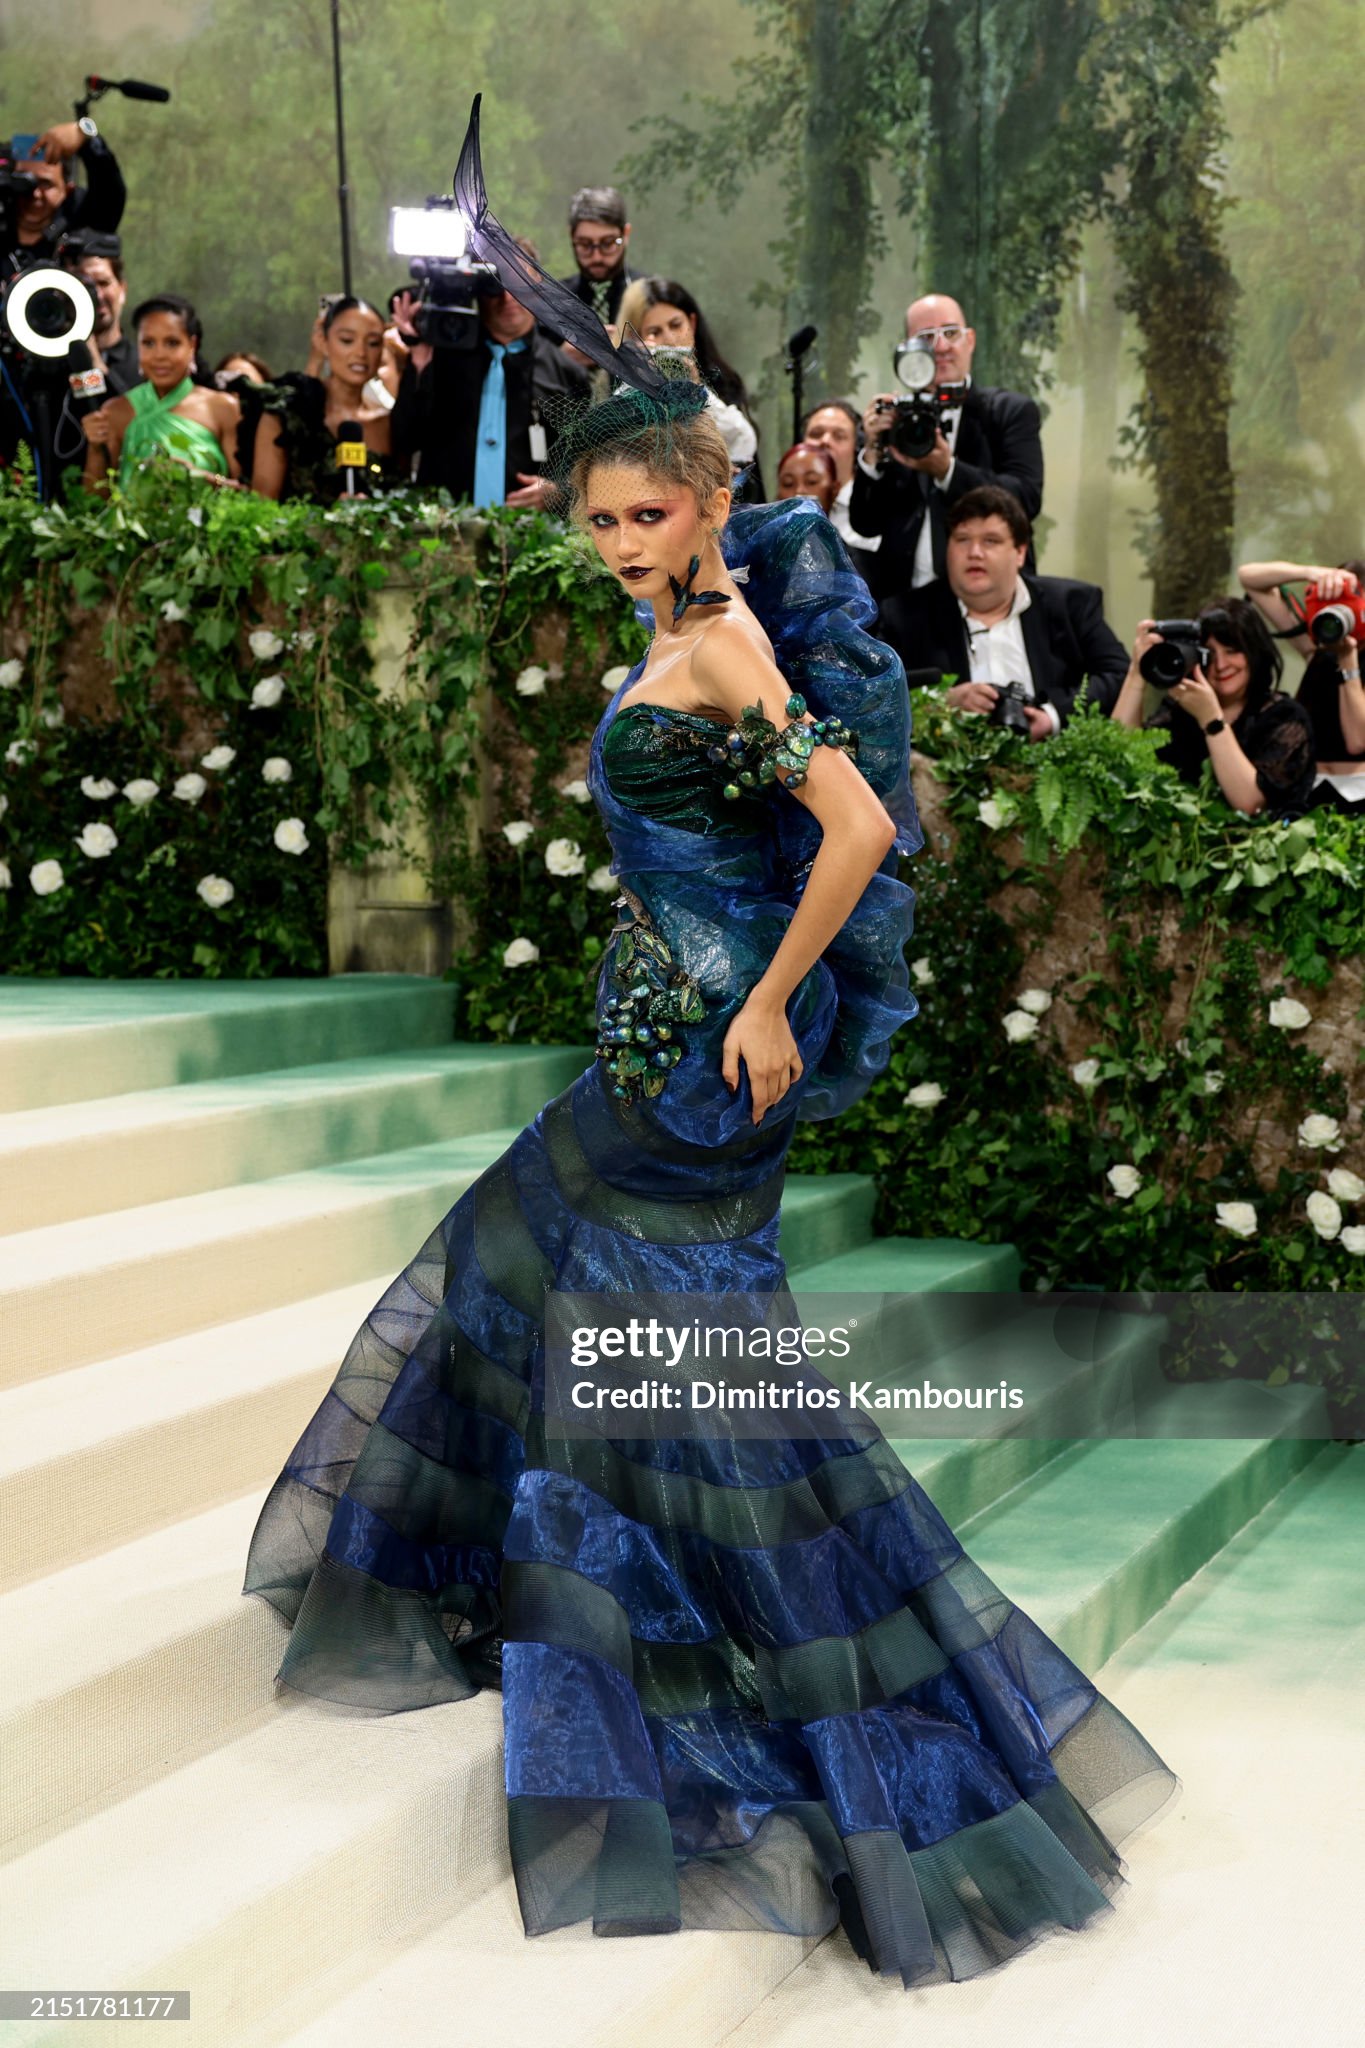 gettyimages-2151781177-2048x2048.jpg